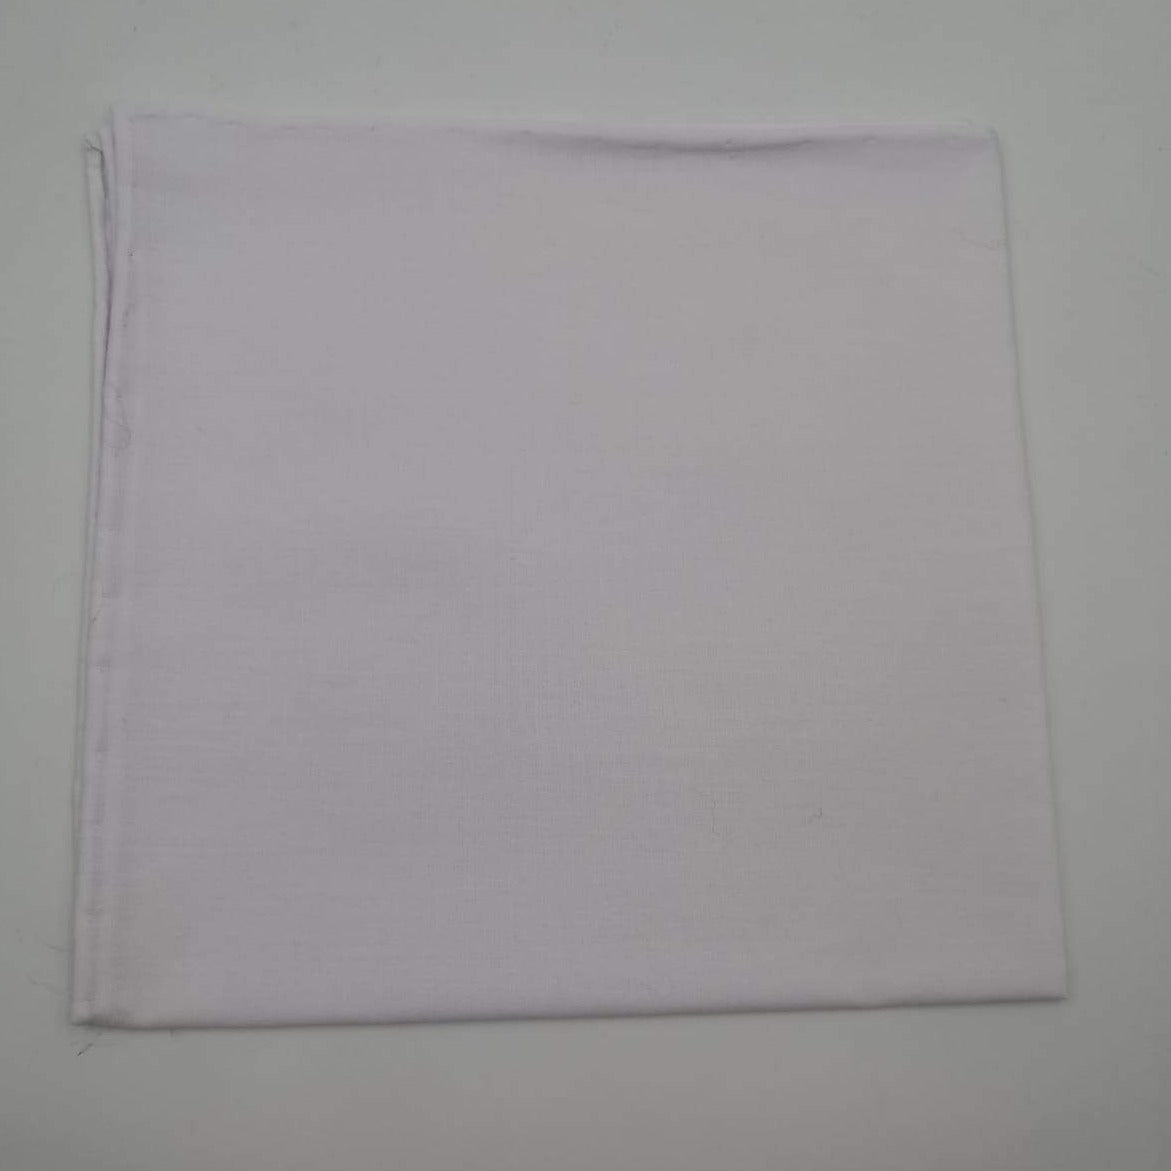 Cruciani & Bella 100% Cotton Hand-rolled  -  Pocket Square White  Handmade in Italy 33 cm X 33cm #3407